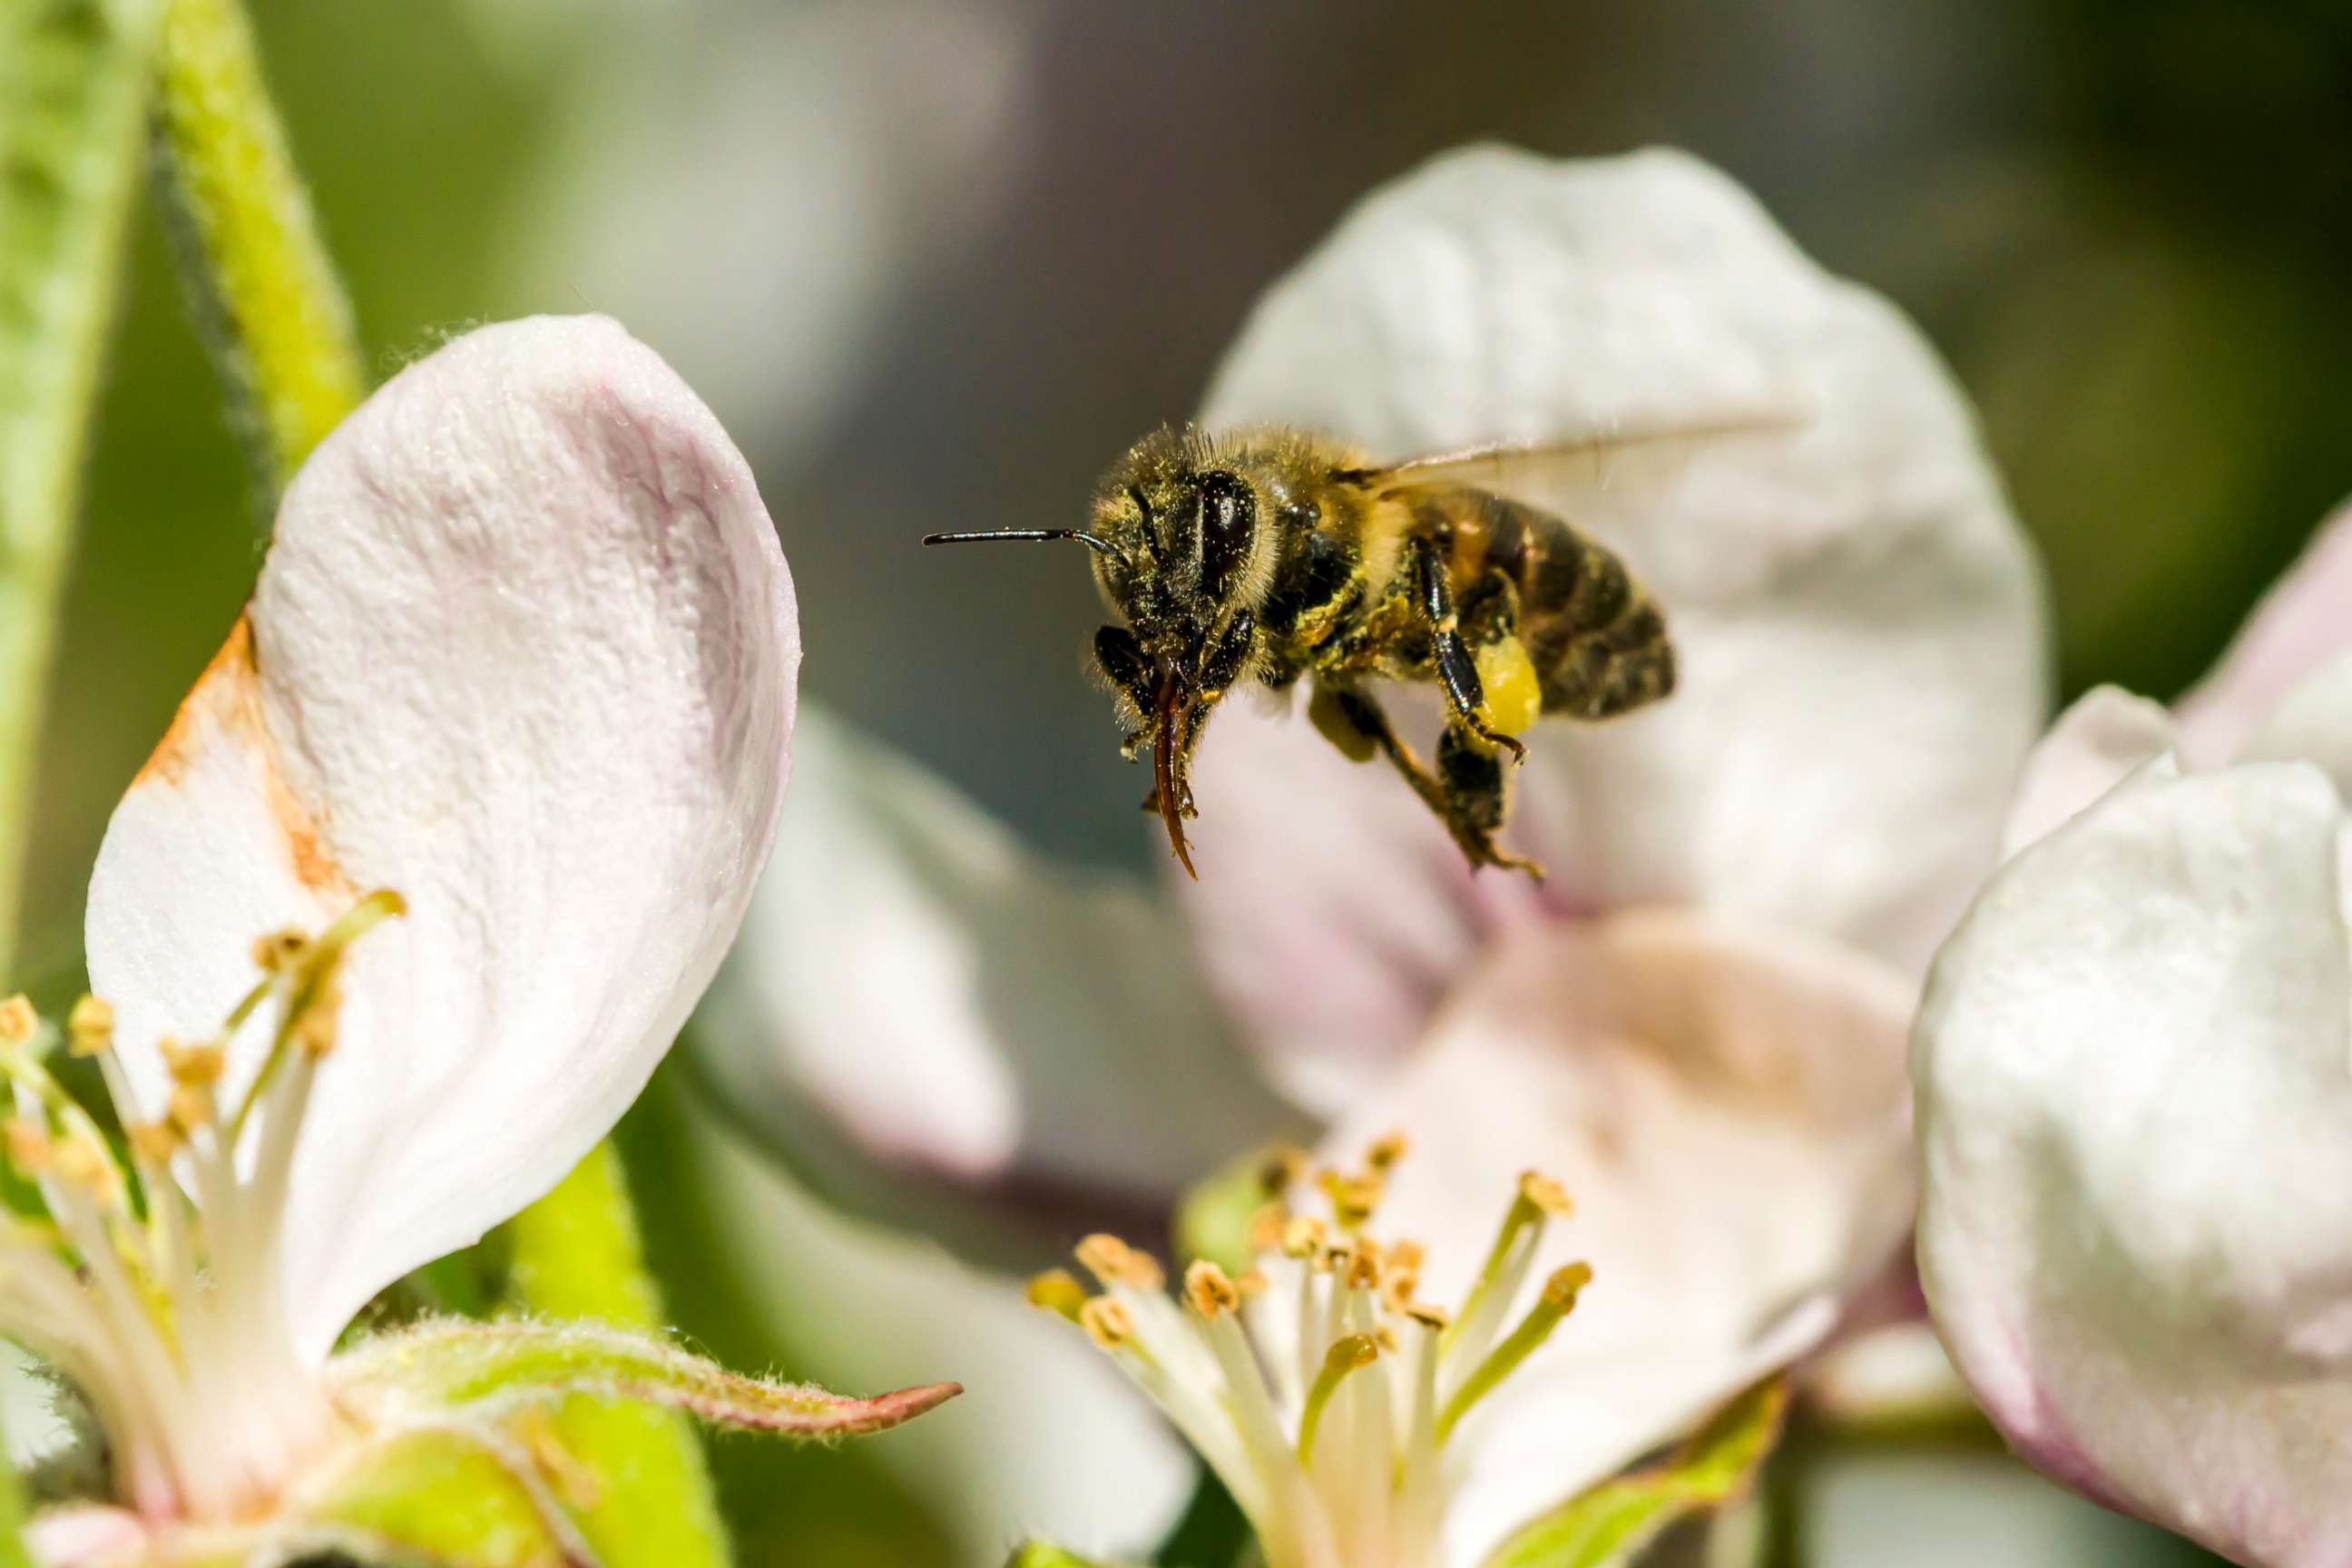 PHOTO: In this file photo, a Carniolan honey bee (Apis mellifera carnica) is collecting nectar at a white apple tree blossom, flying over it, May 9, 2016, in Saxony, Germany.